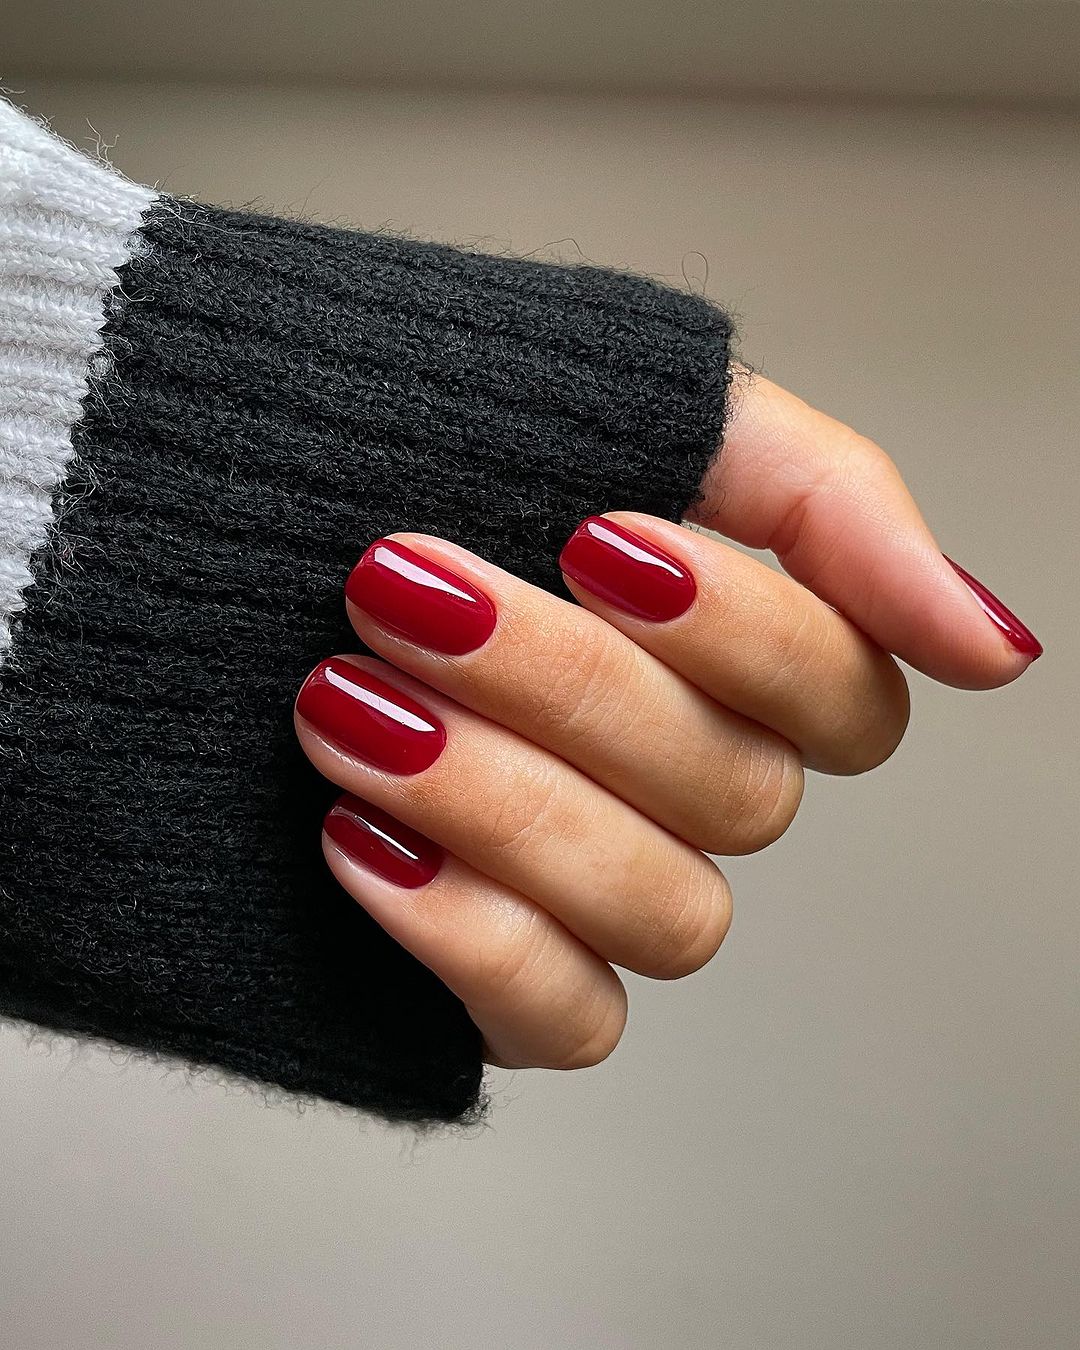 The Hottest Nail Polish Shades You Need On Your Fingers Now